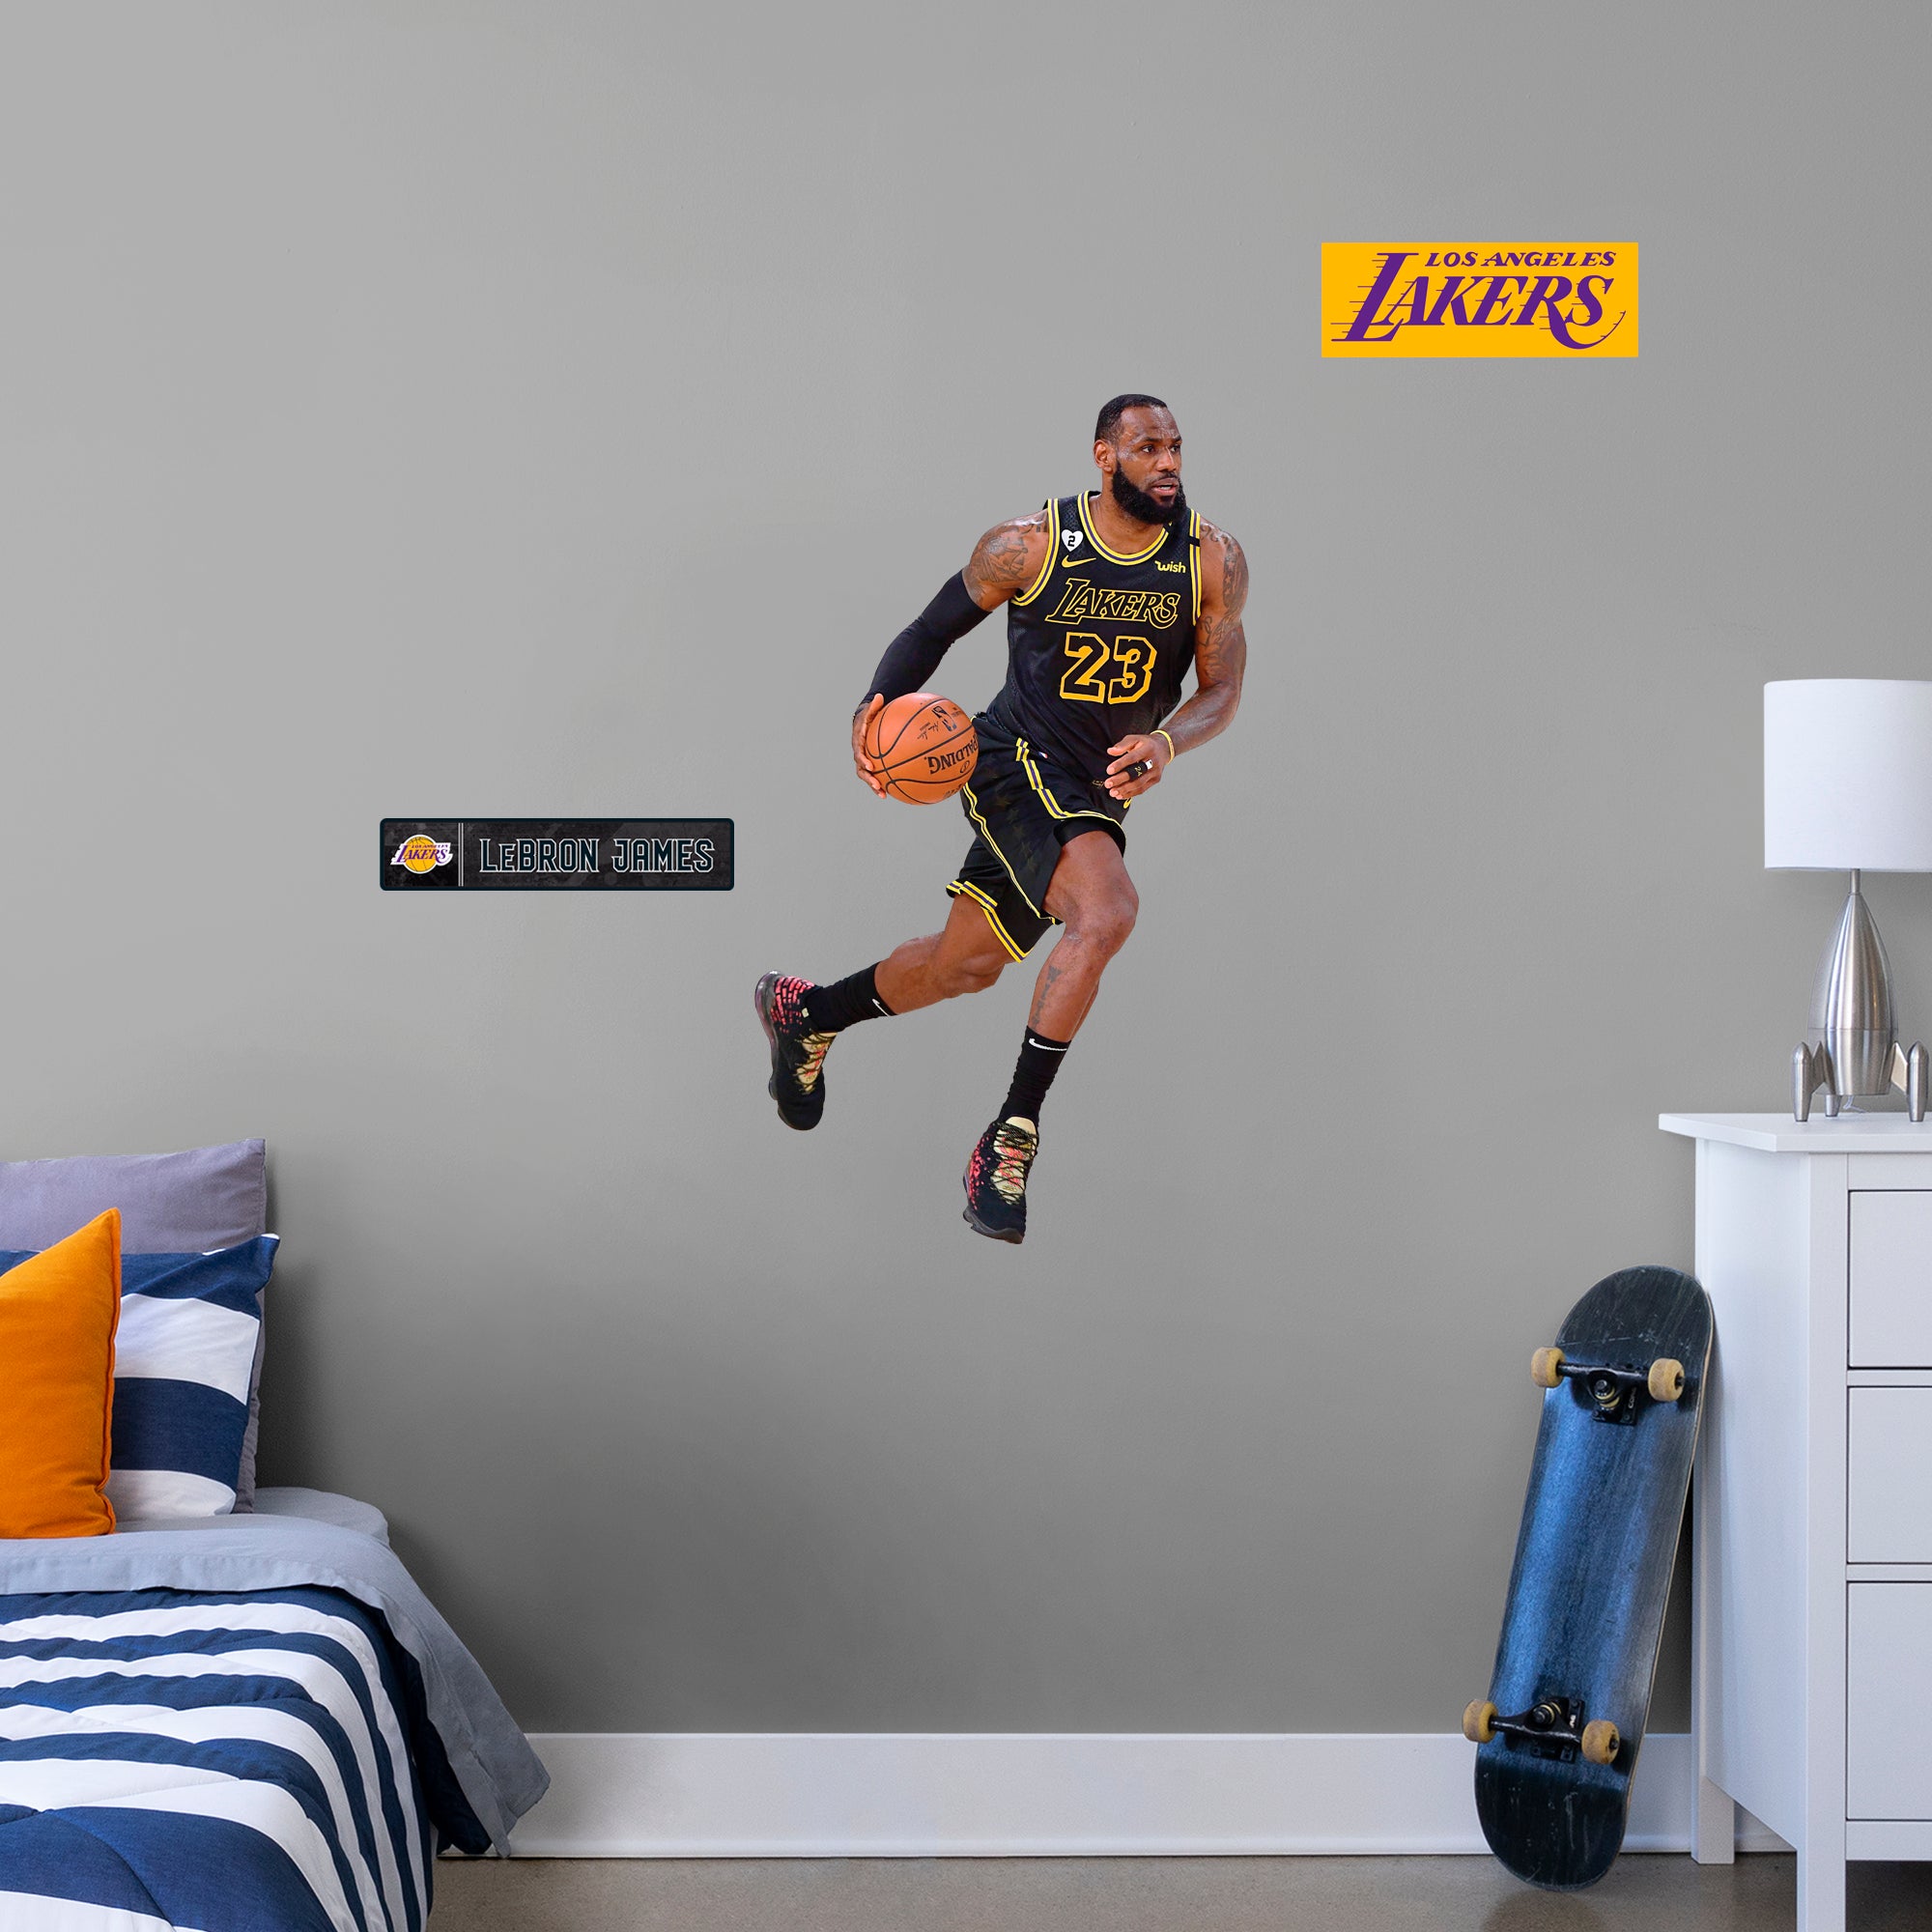 LeBron James for Los Angeles Lakers: Black Jersey - Officially Licensed NBA Removable Wall Decal XL by Fathead | Vinyl